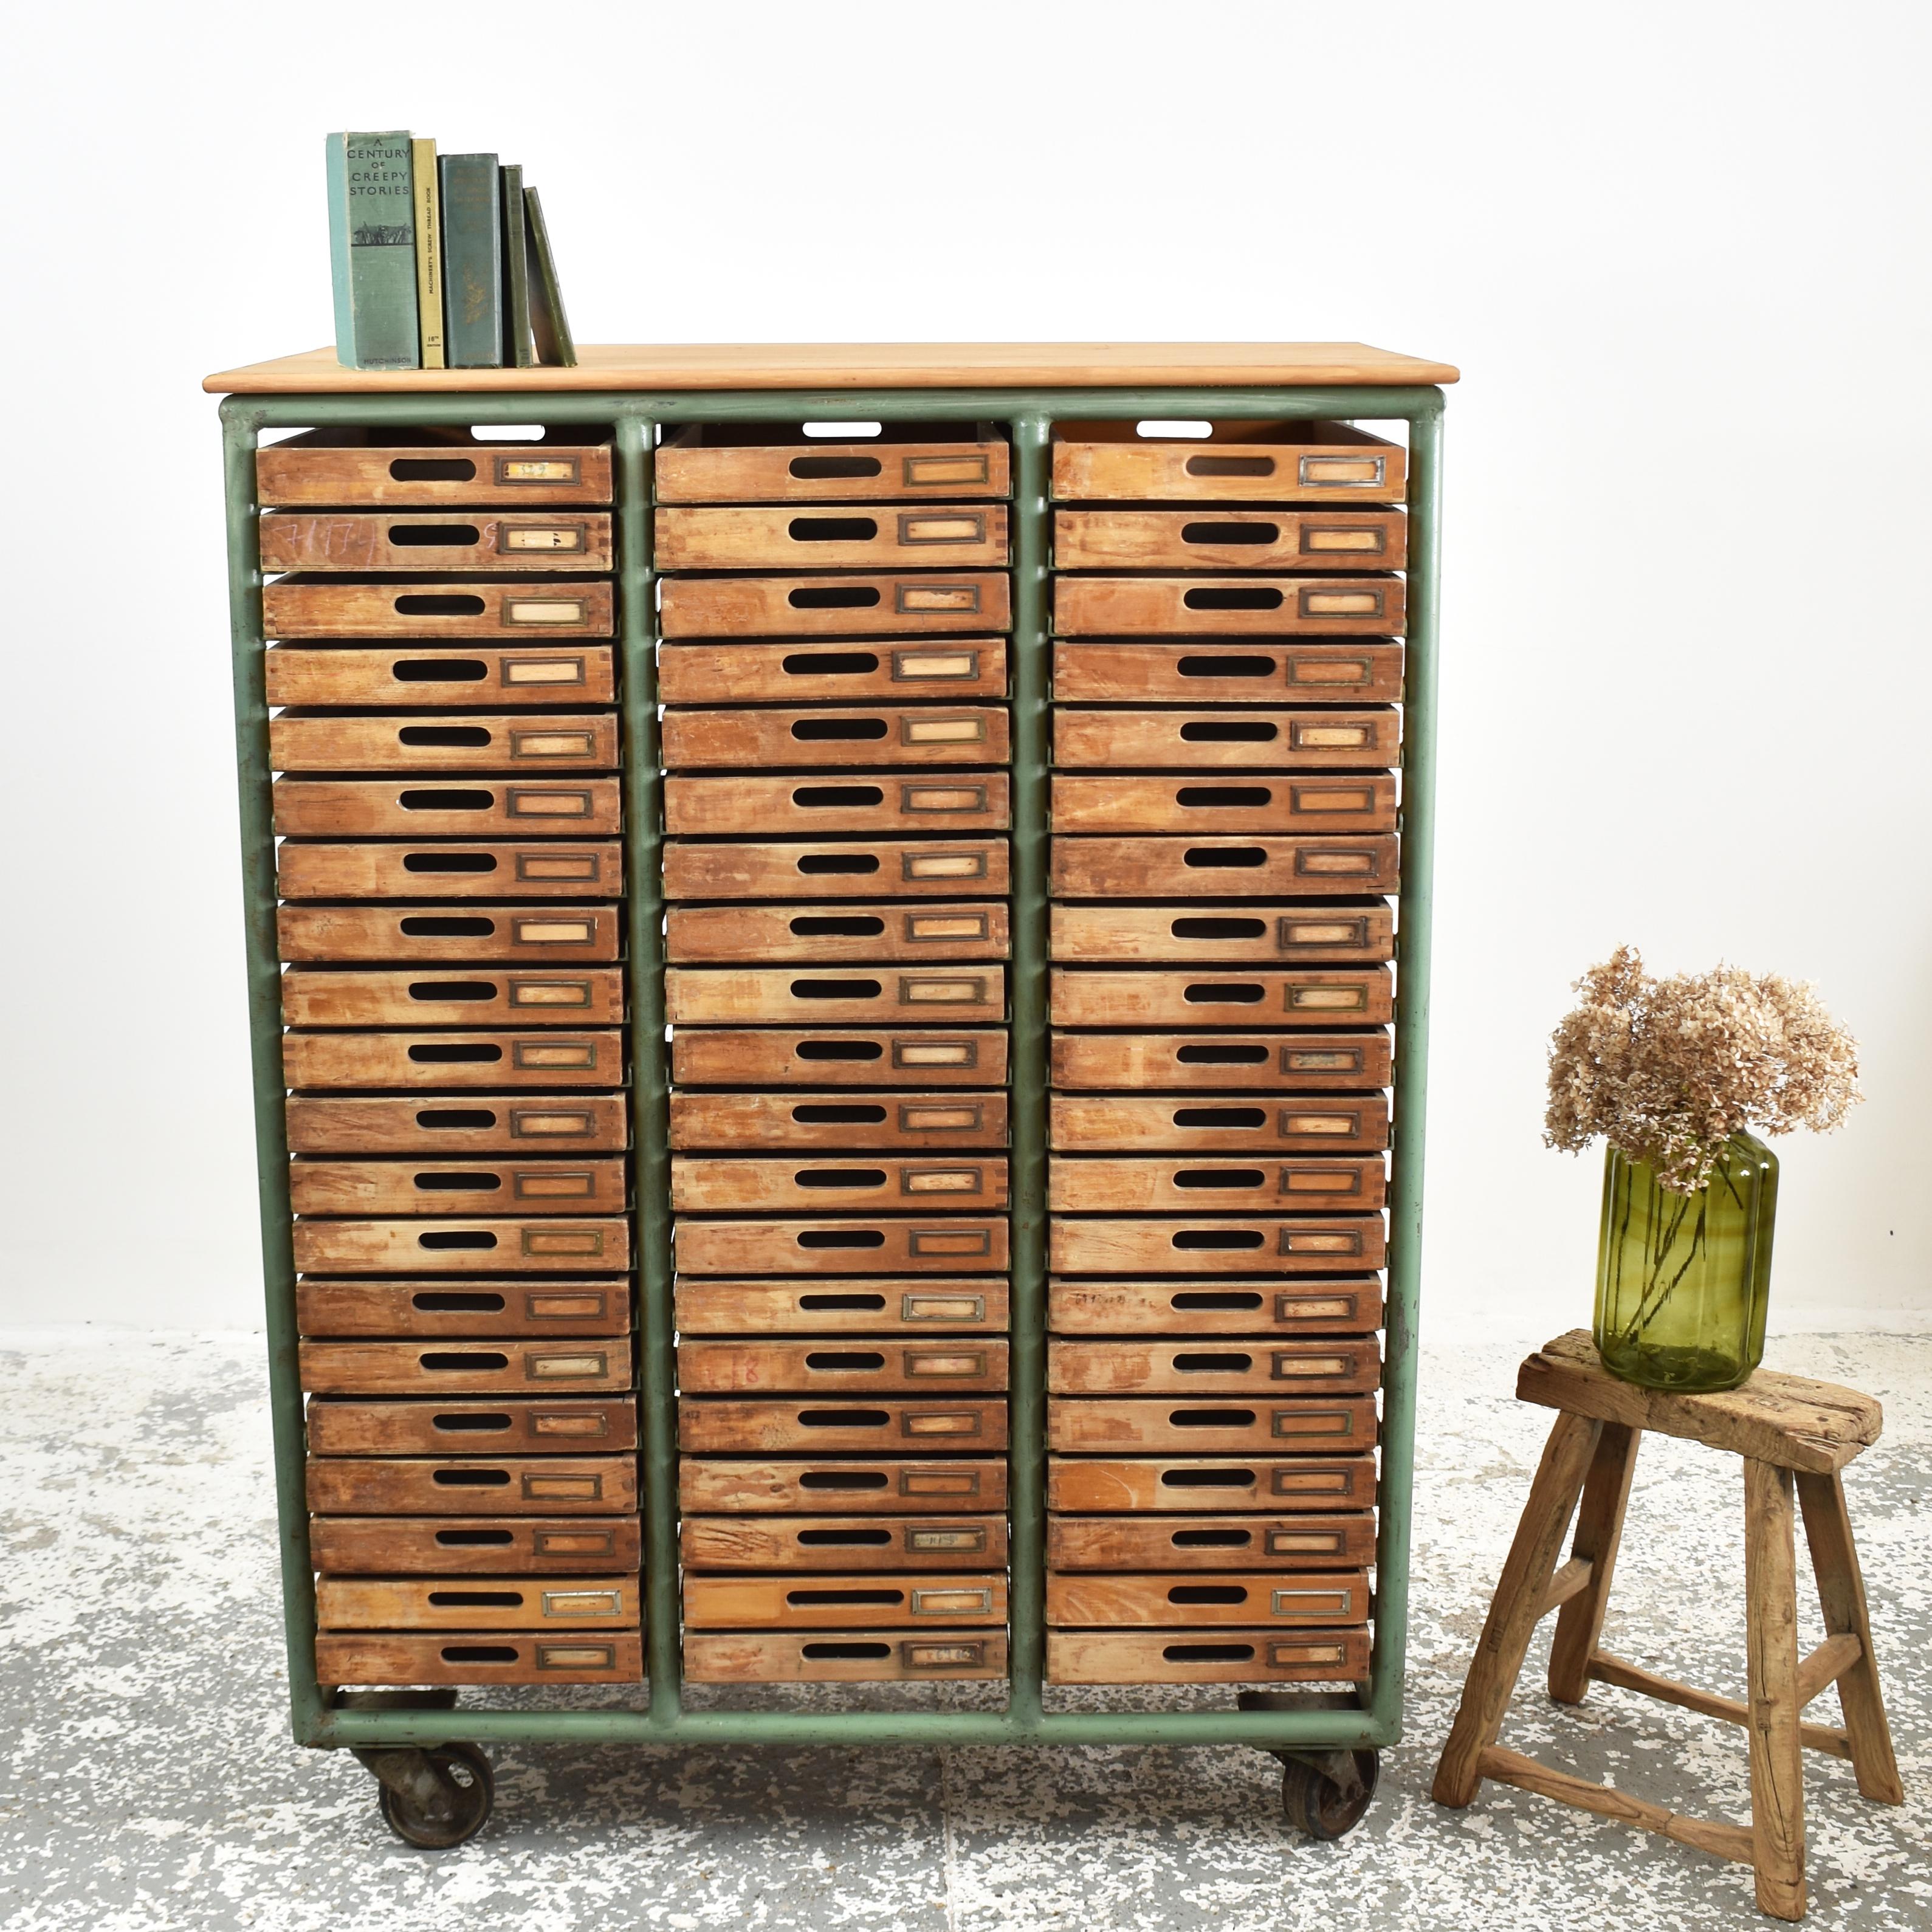 Vintage Industrial Haberdashery Storage Drawer Unit

An amazing statement set of factory drawers. These drawers were salvaged from a disused Hungarian factory. There are 60 drawers split into 3 tiers. The drawers are wooden with dovetails joints and